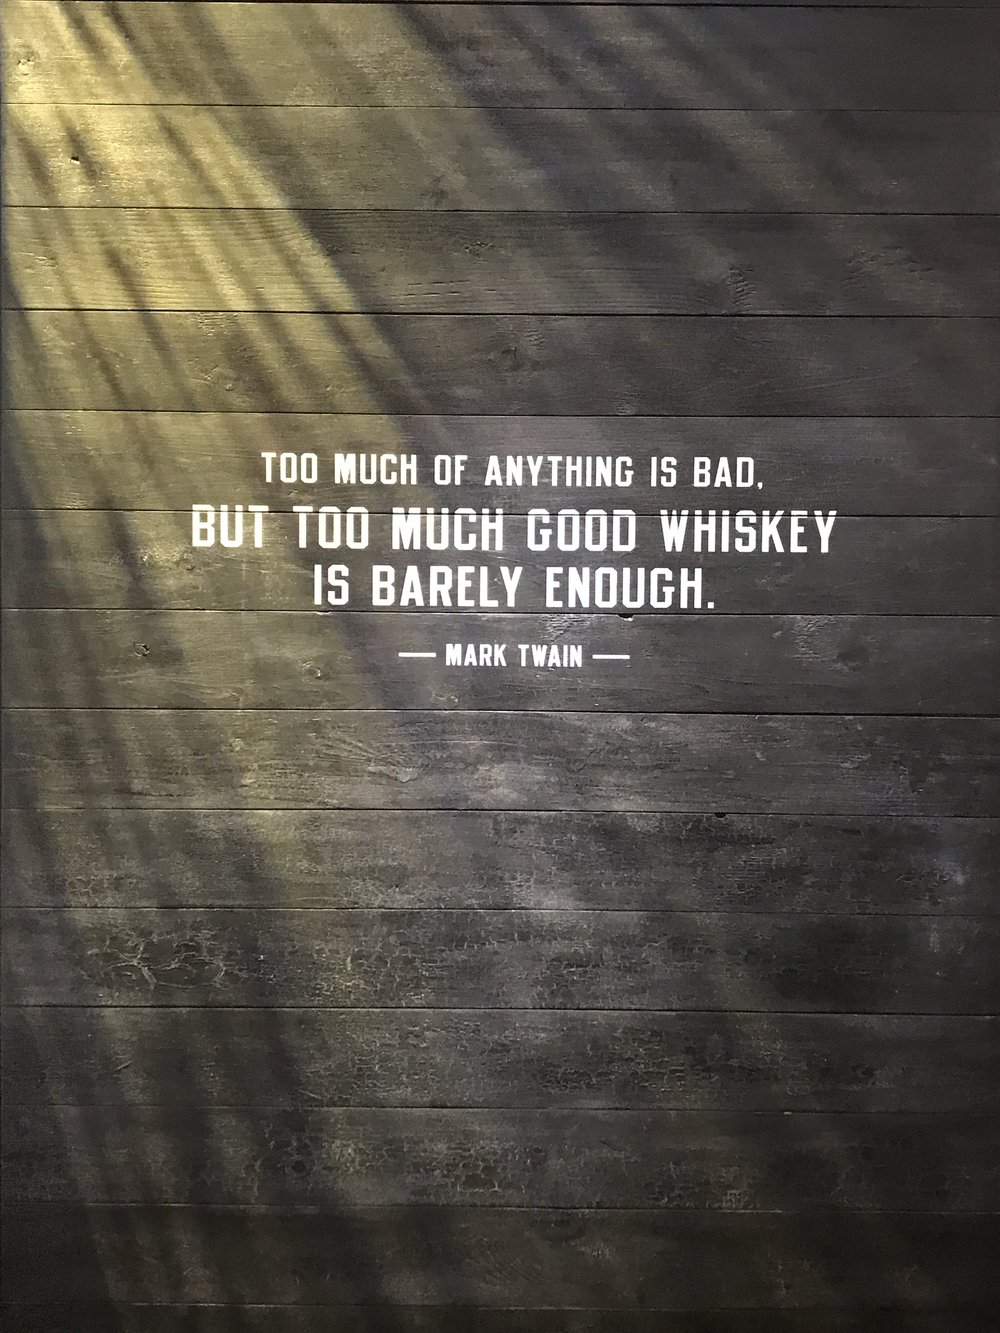 Wise words from Mark Twain